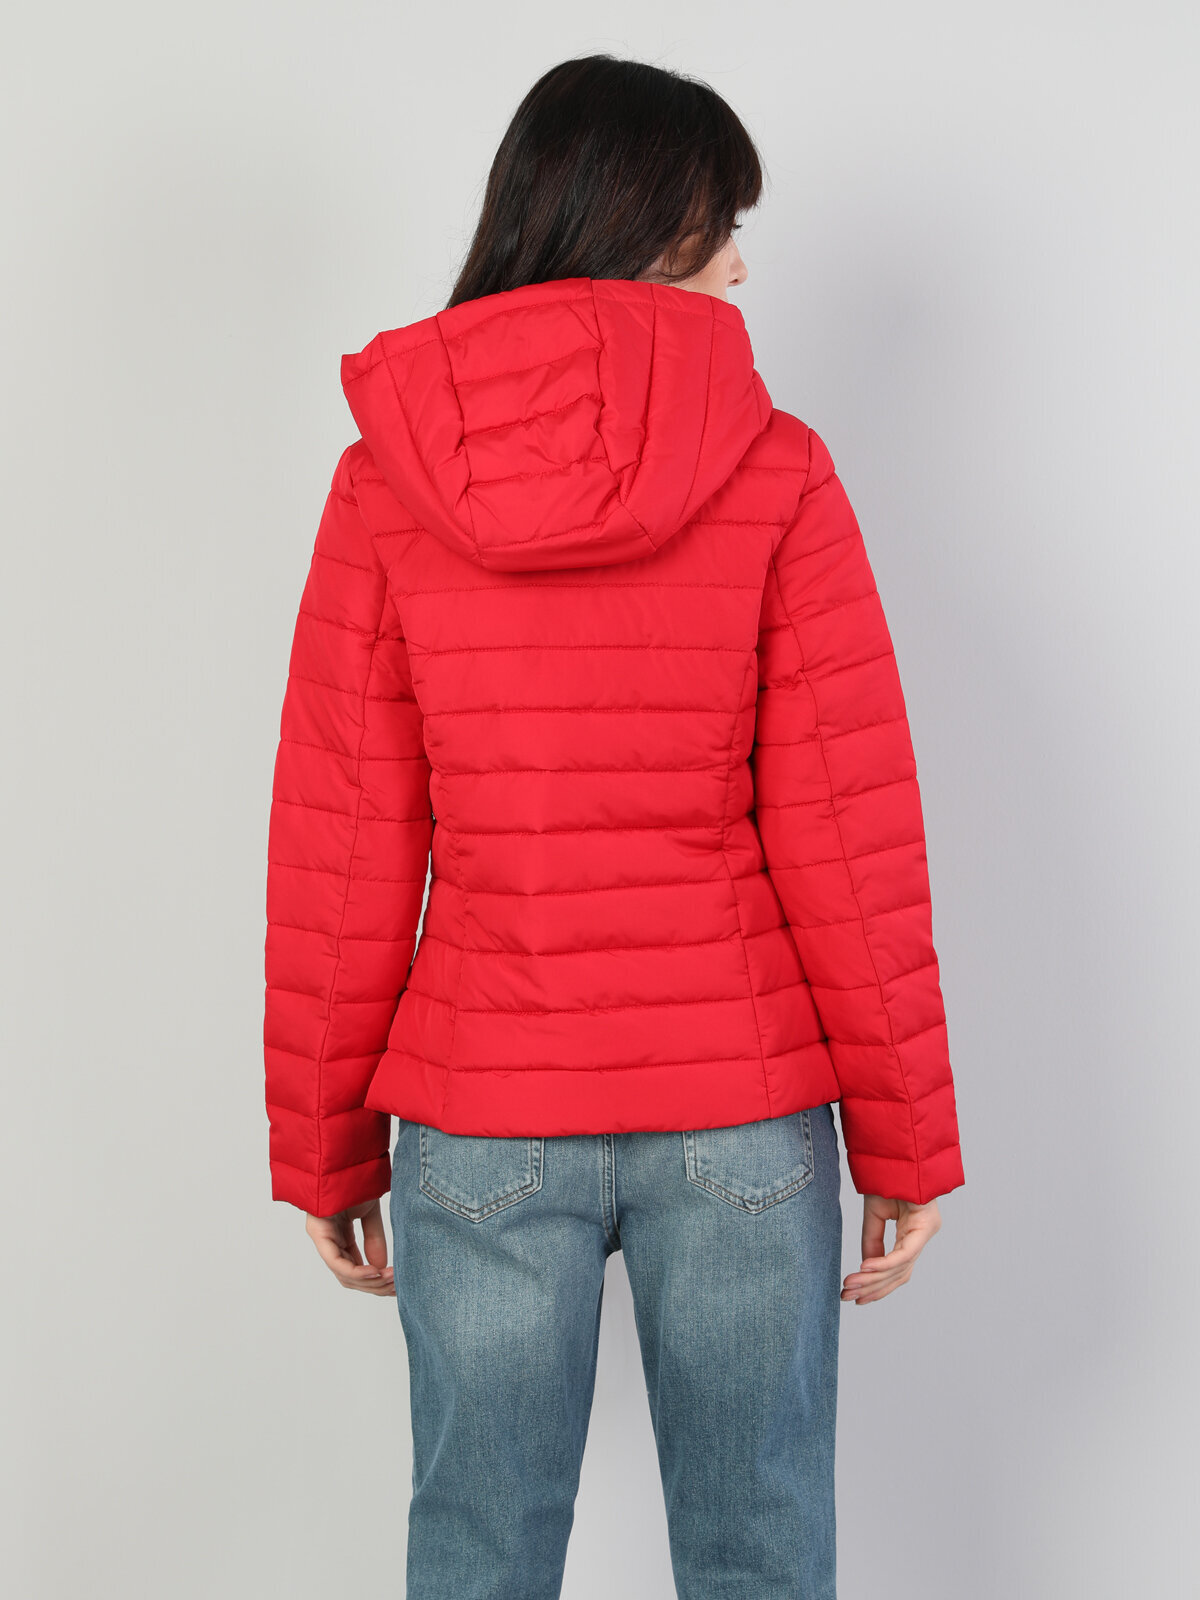 Colins Red Woman Jackets. 2